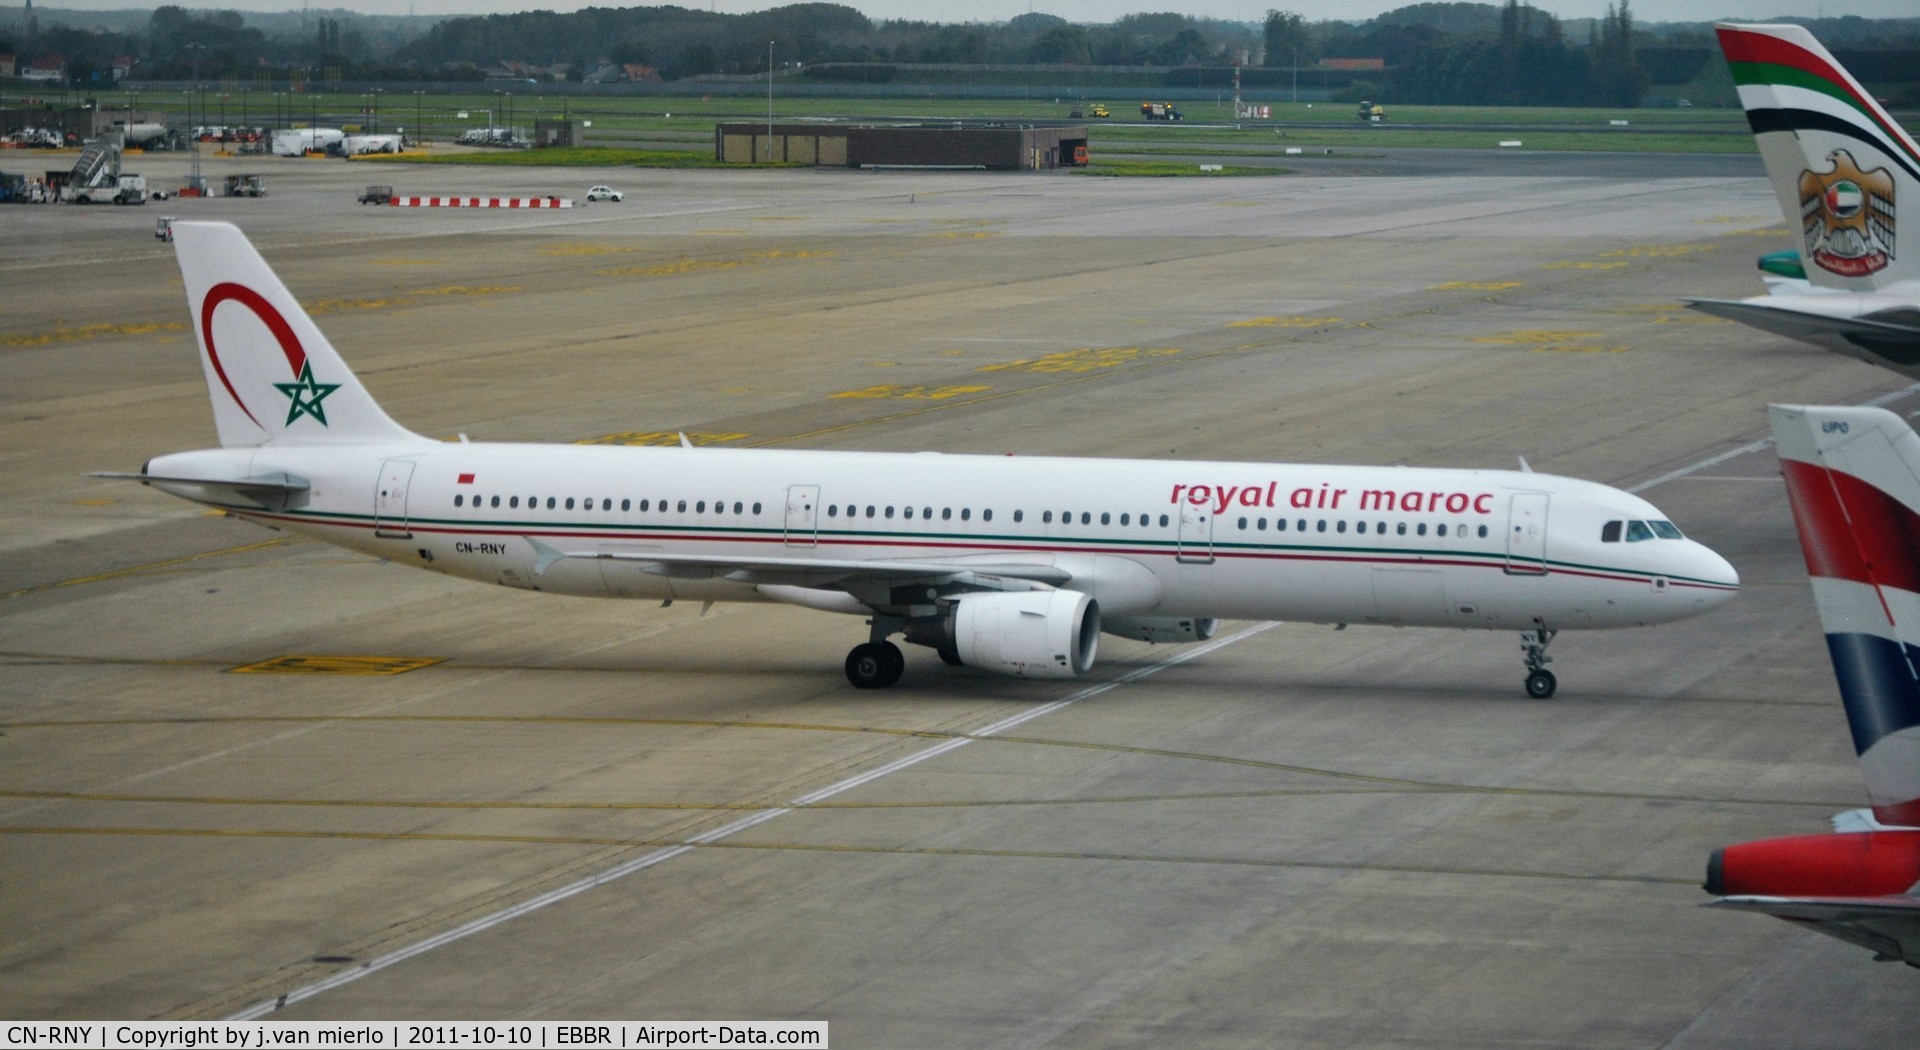 CN-RNY, 2003 Airbus A321-211 C/N 2076, taxiing at Brussels